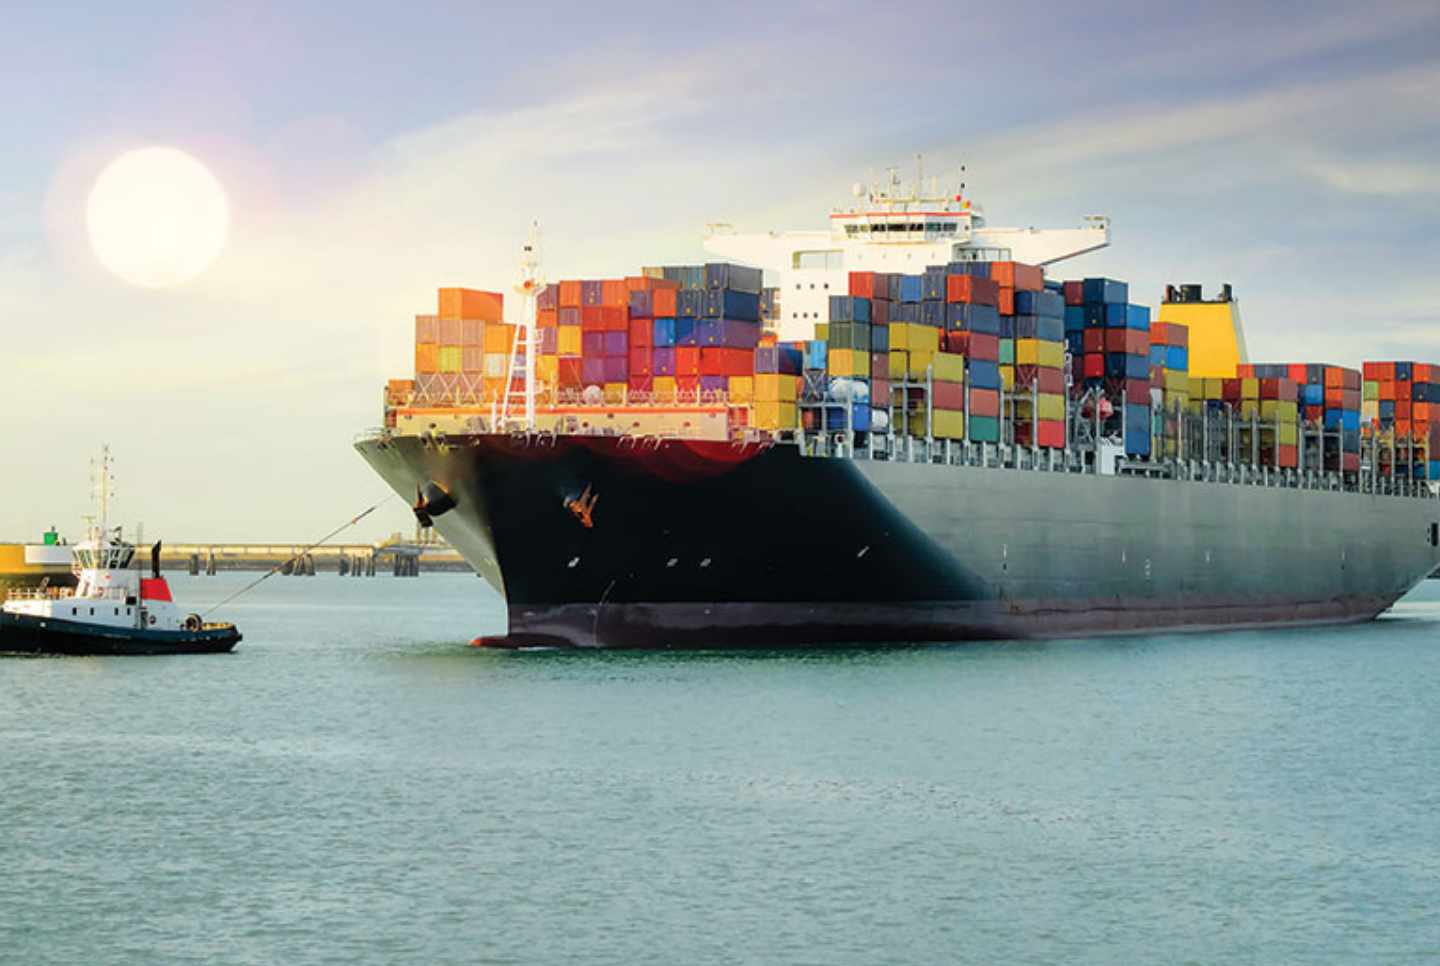 Shippers relying on maritime operators to get their goods to market have been slammed in recent months. Meanwhile container carriers are looking at 50%-plus percentage gains in revenue.